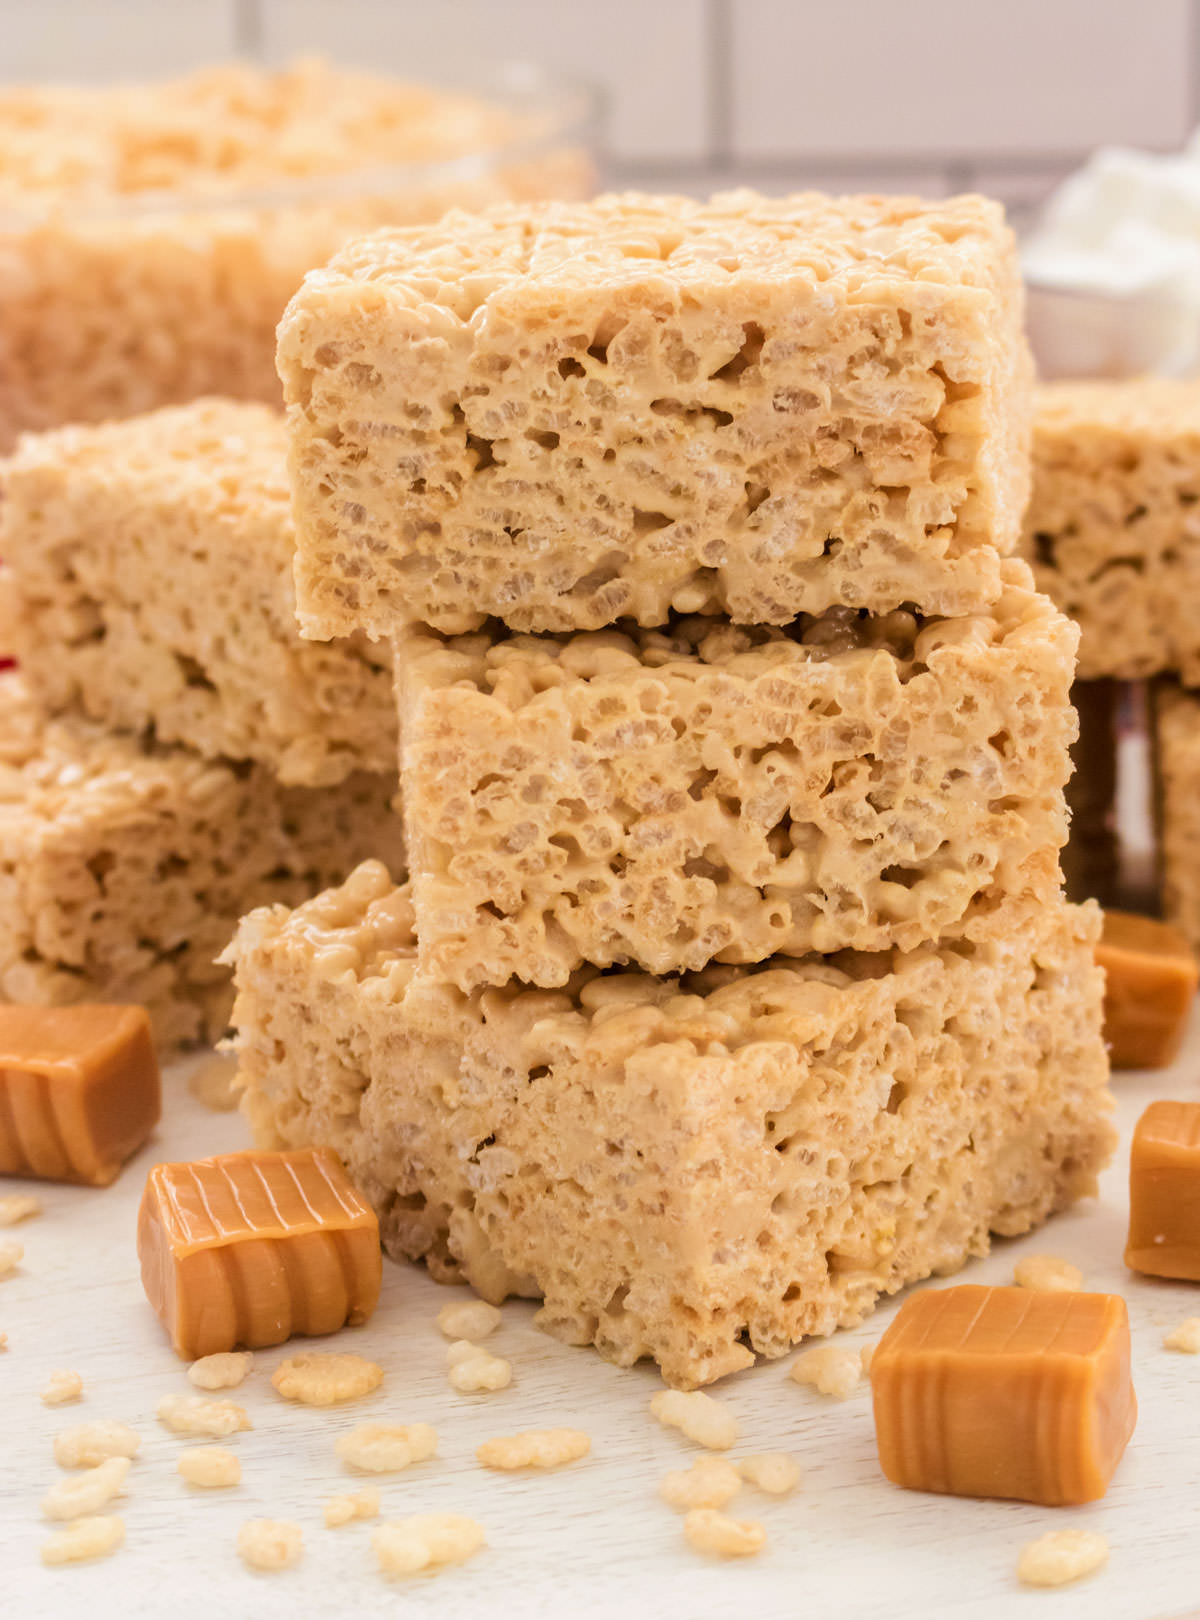 Closeup on a stack of three Caramel Rice Krispie Treats sitting on a white table surrounded by caramel candies and Rice Krispie Cereal.